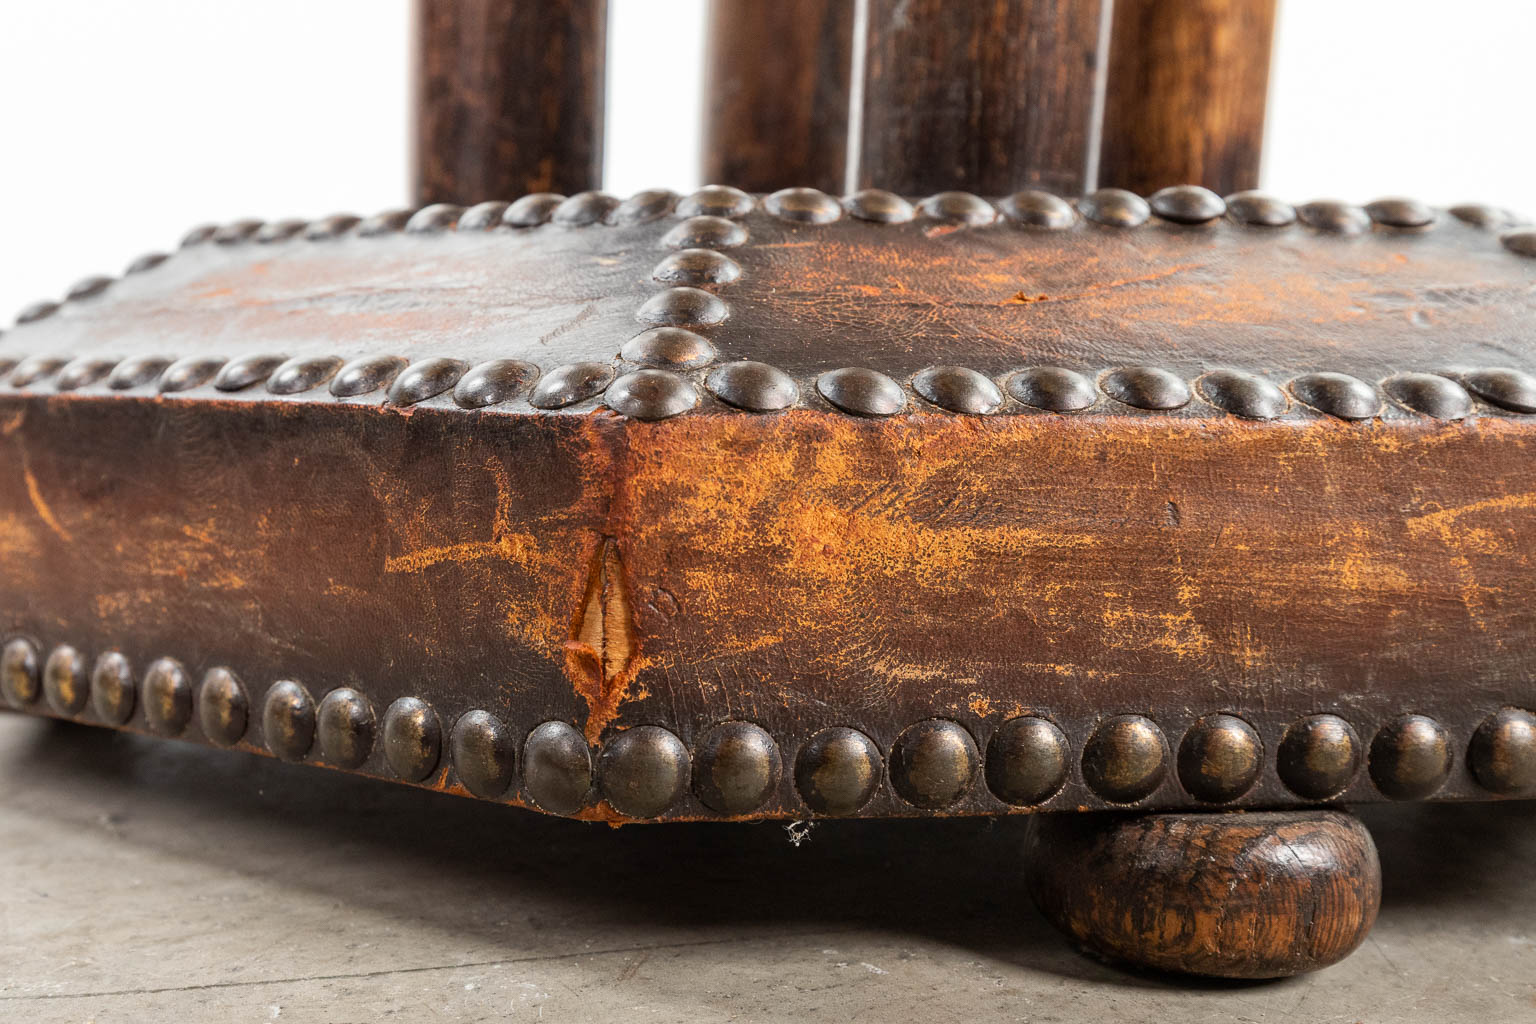 A coffee table made of leather and finished with nails in art deco style. (H:58cm)